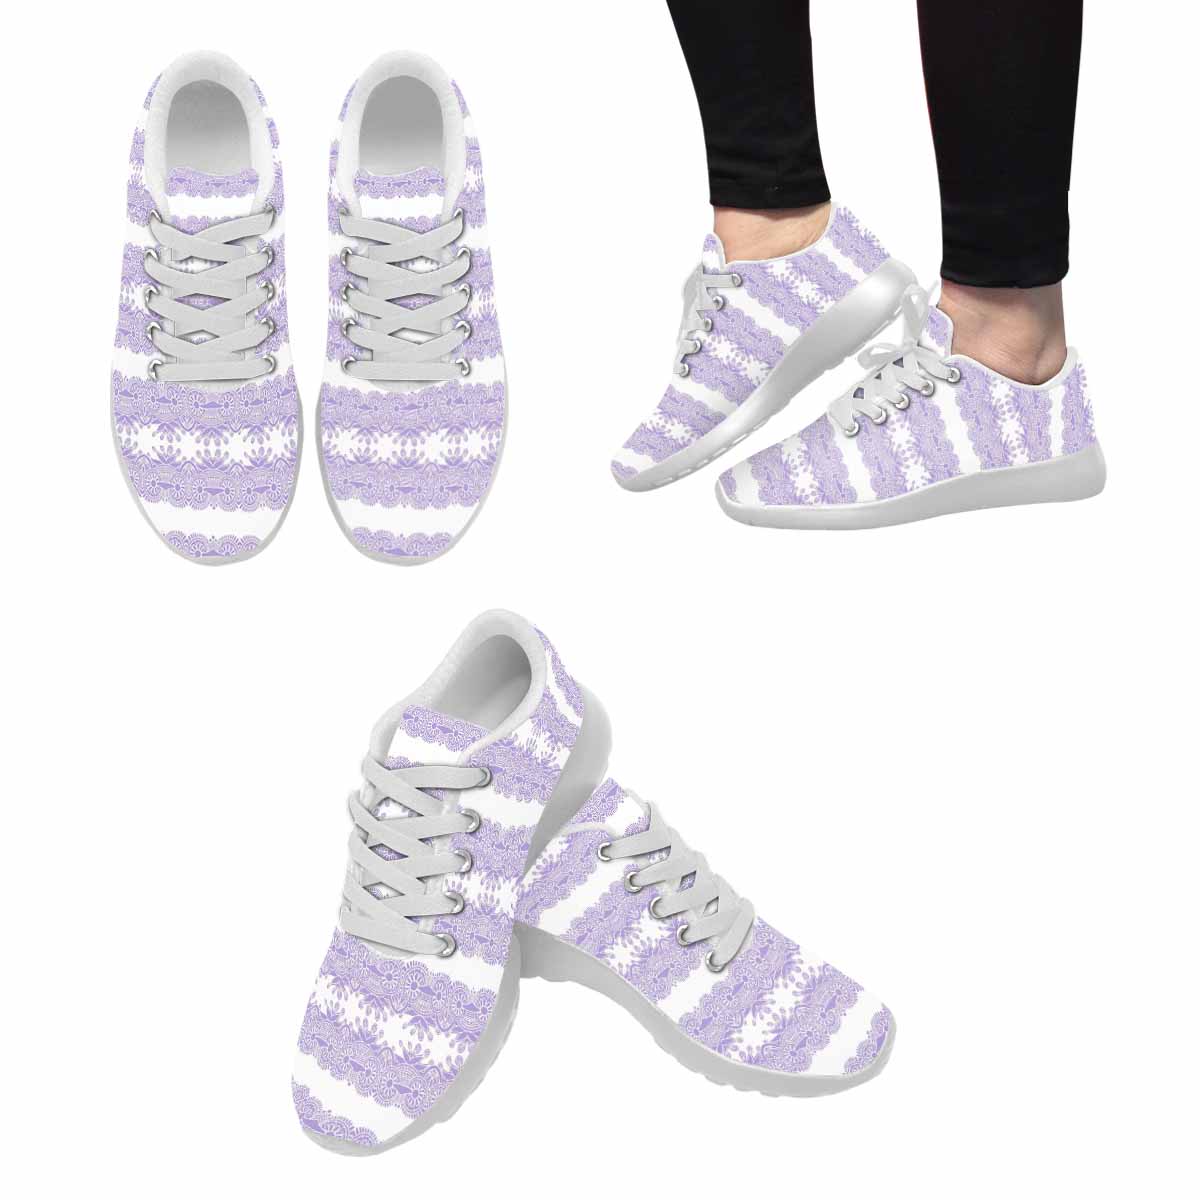 Victorian lace print, womens cute casual or running sneakers, design 07